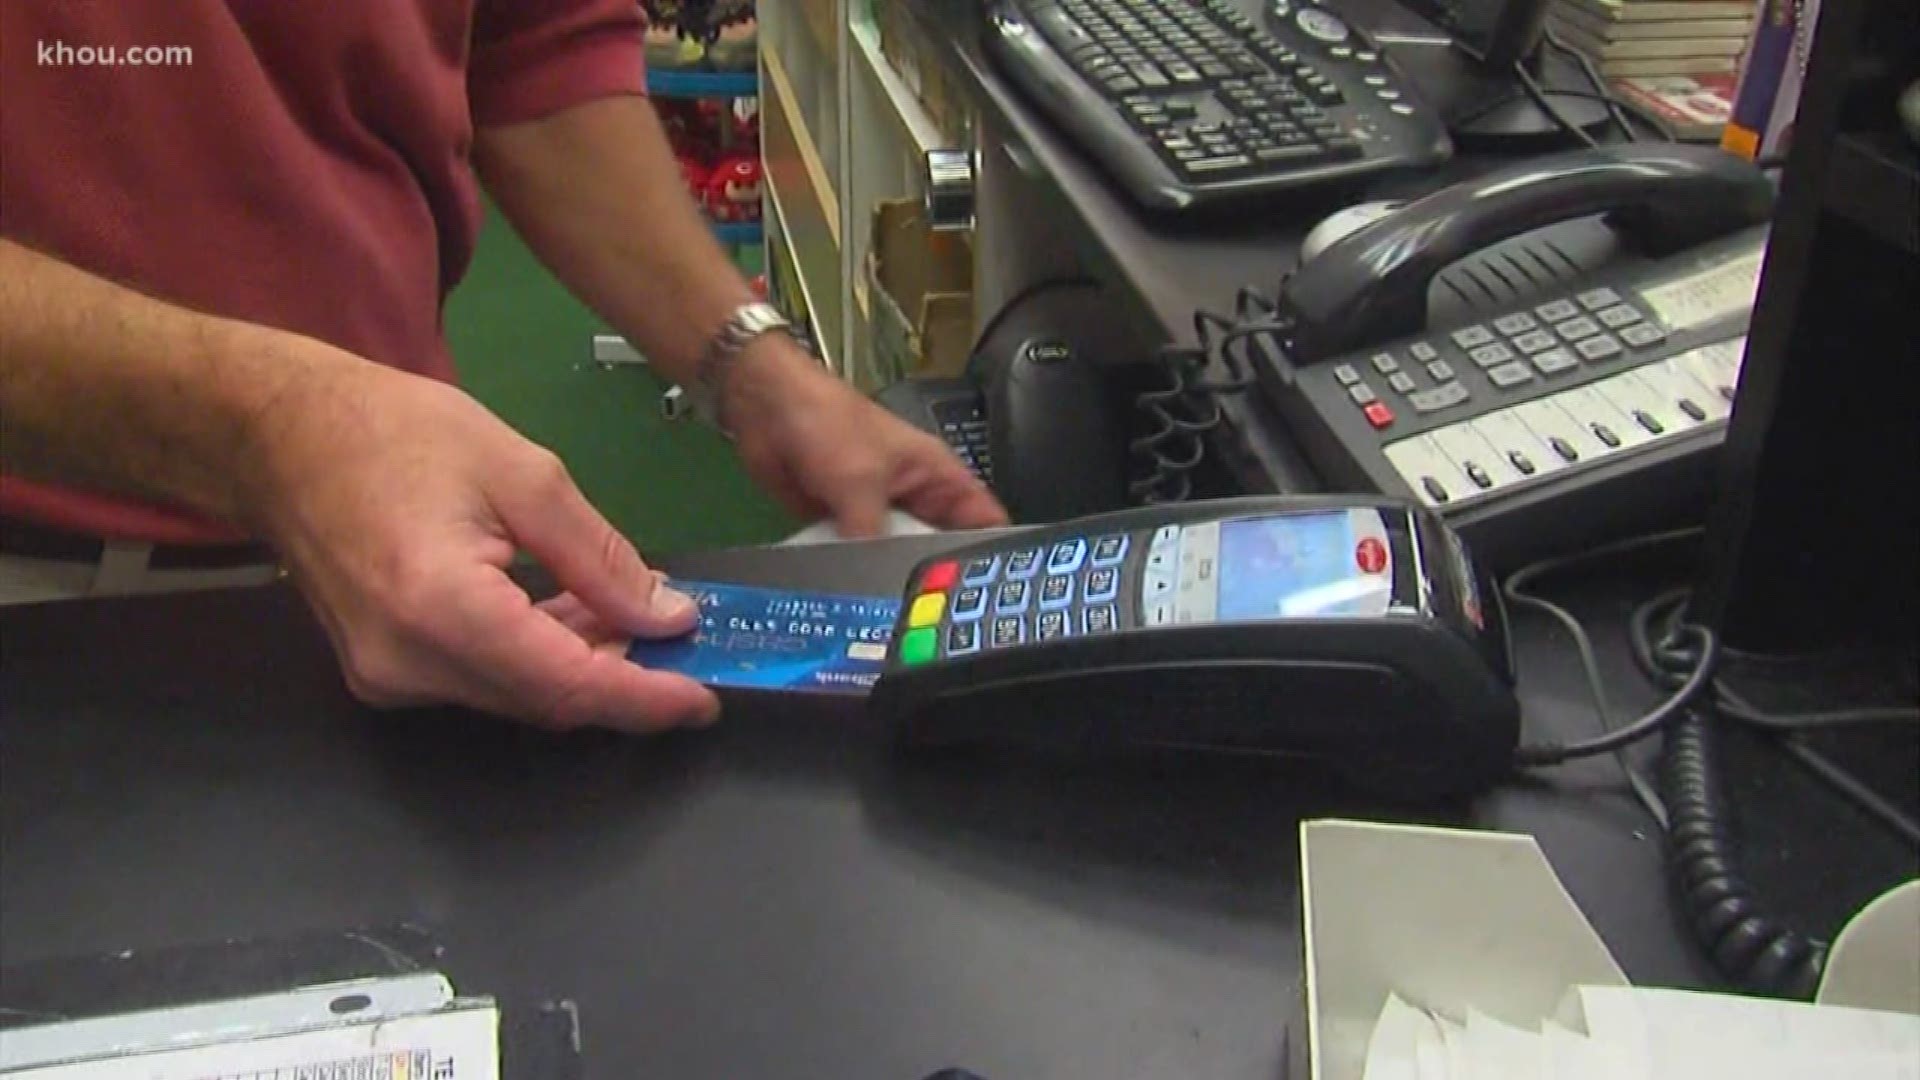 Credit or debit? These days many more people pay with debit to avoid interest charges and late fees. but consumer reporter John Matarese shows us why that's not alwa